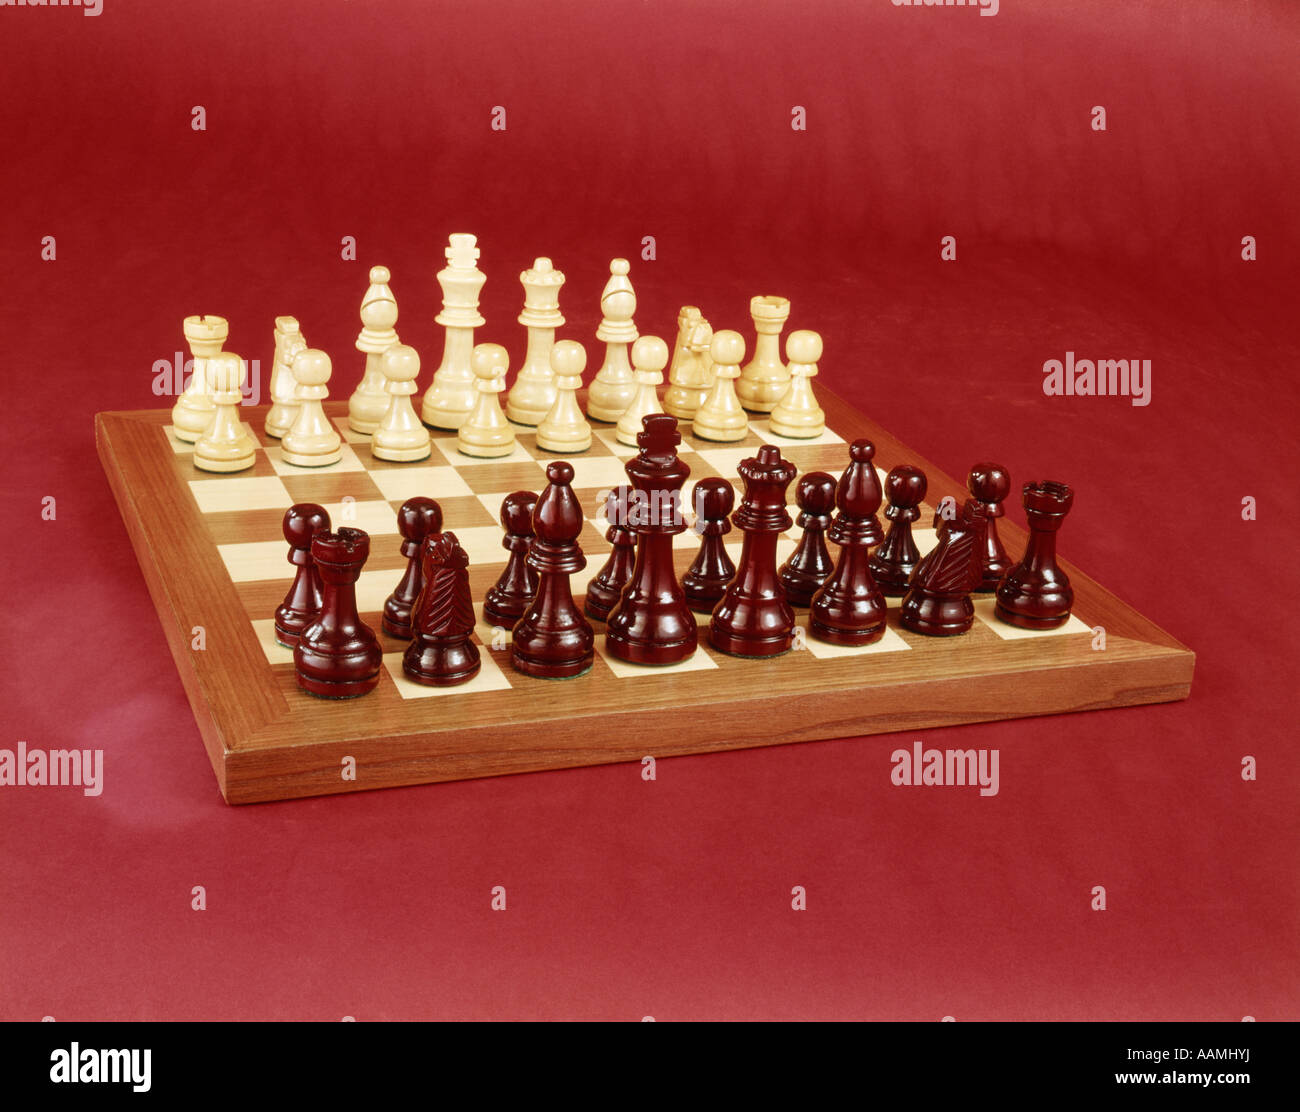 1970s CHESS SET ARRANGED ON BOARD STILL LIFE RED AND WHITE CHESS PIECES GAME 1970s Stock Photo